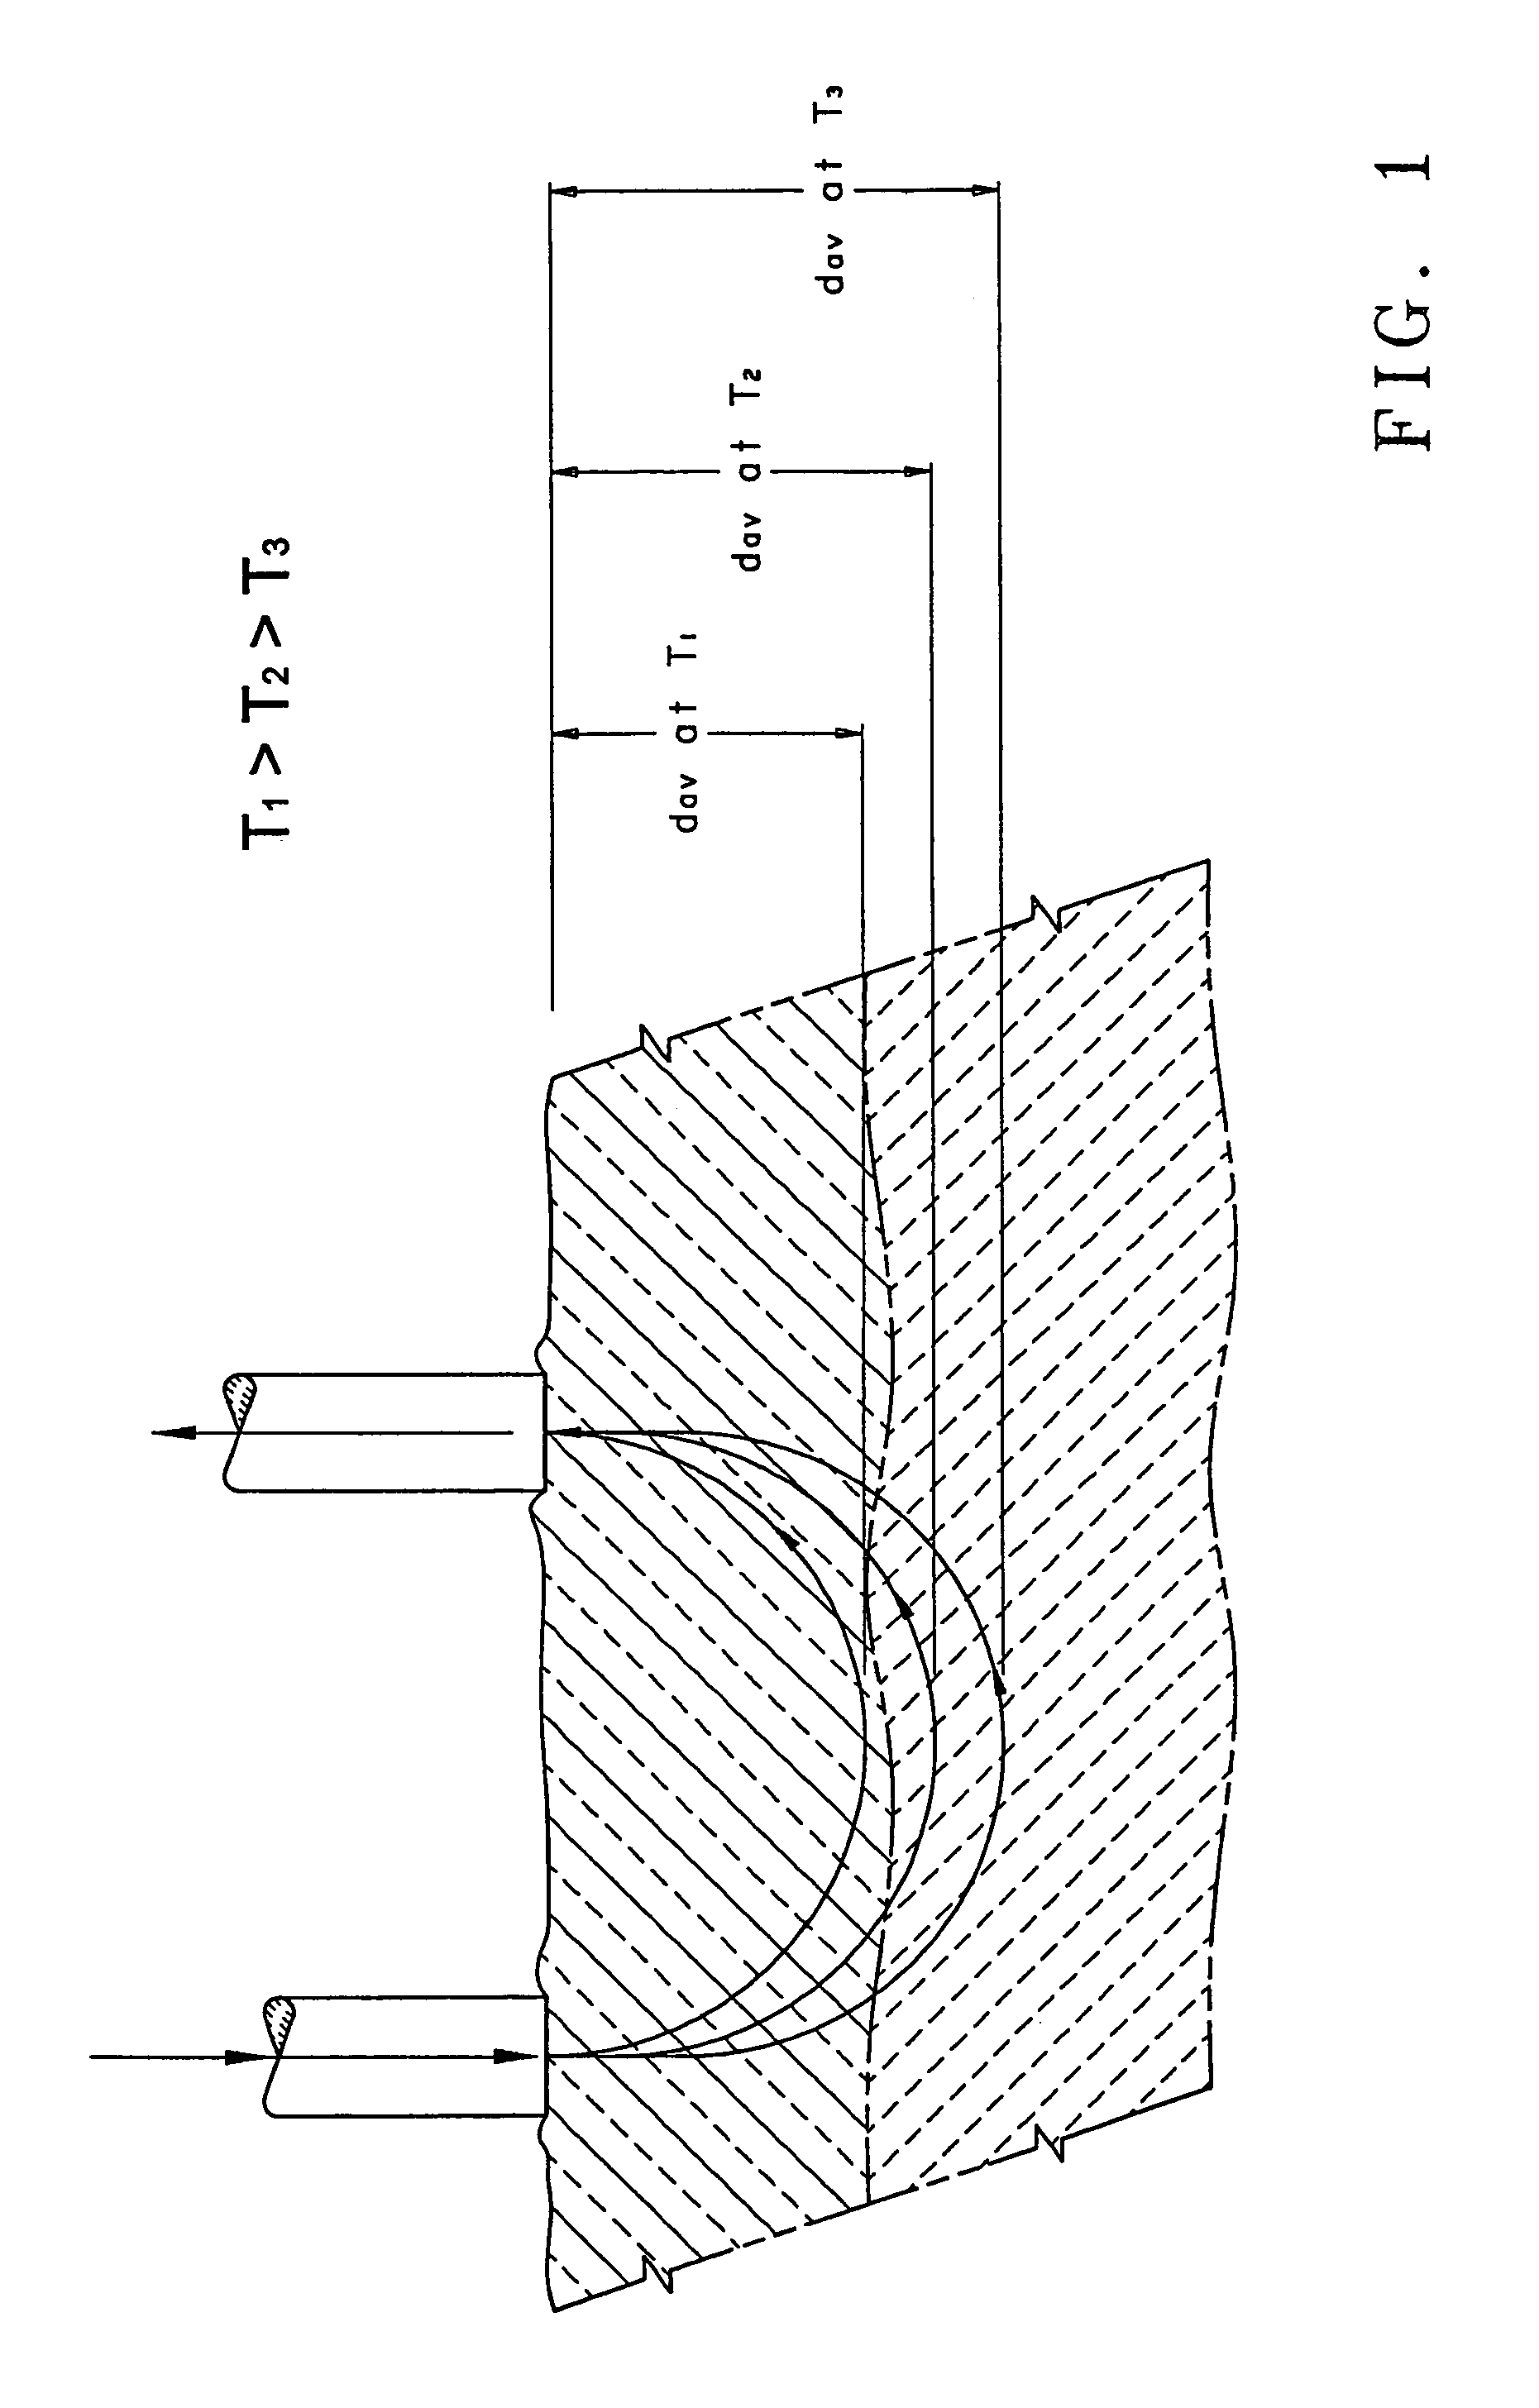 Method for modulating light penetration depth in tissue and diagnostic applications using same